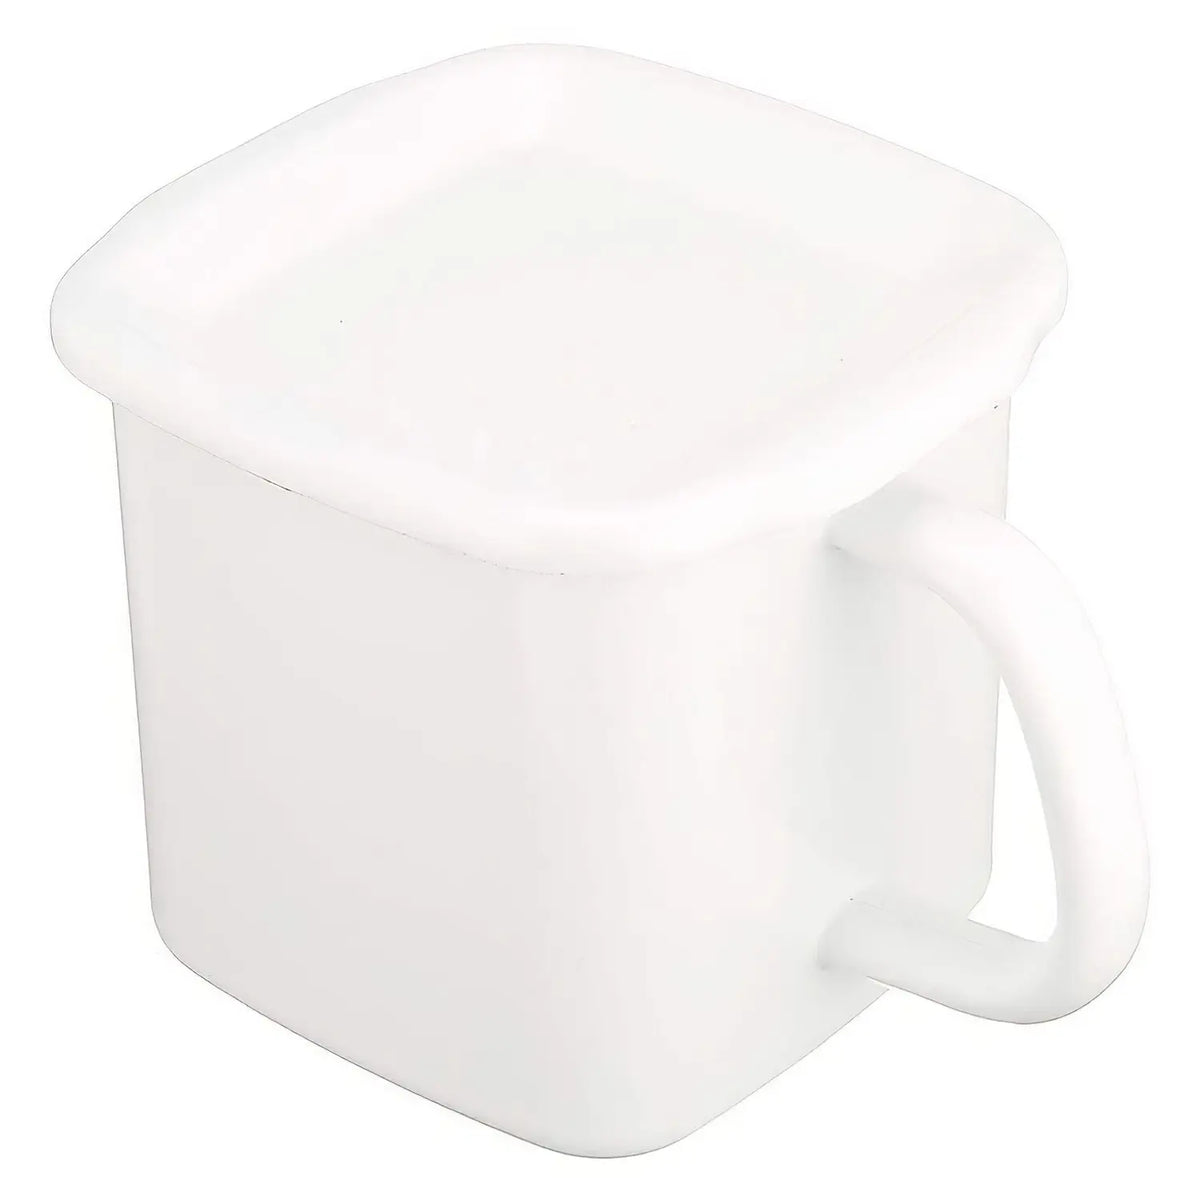 Noda Horo White Series Enamel Square Food Containers with Handle and Enamel Lid 1.2L